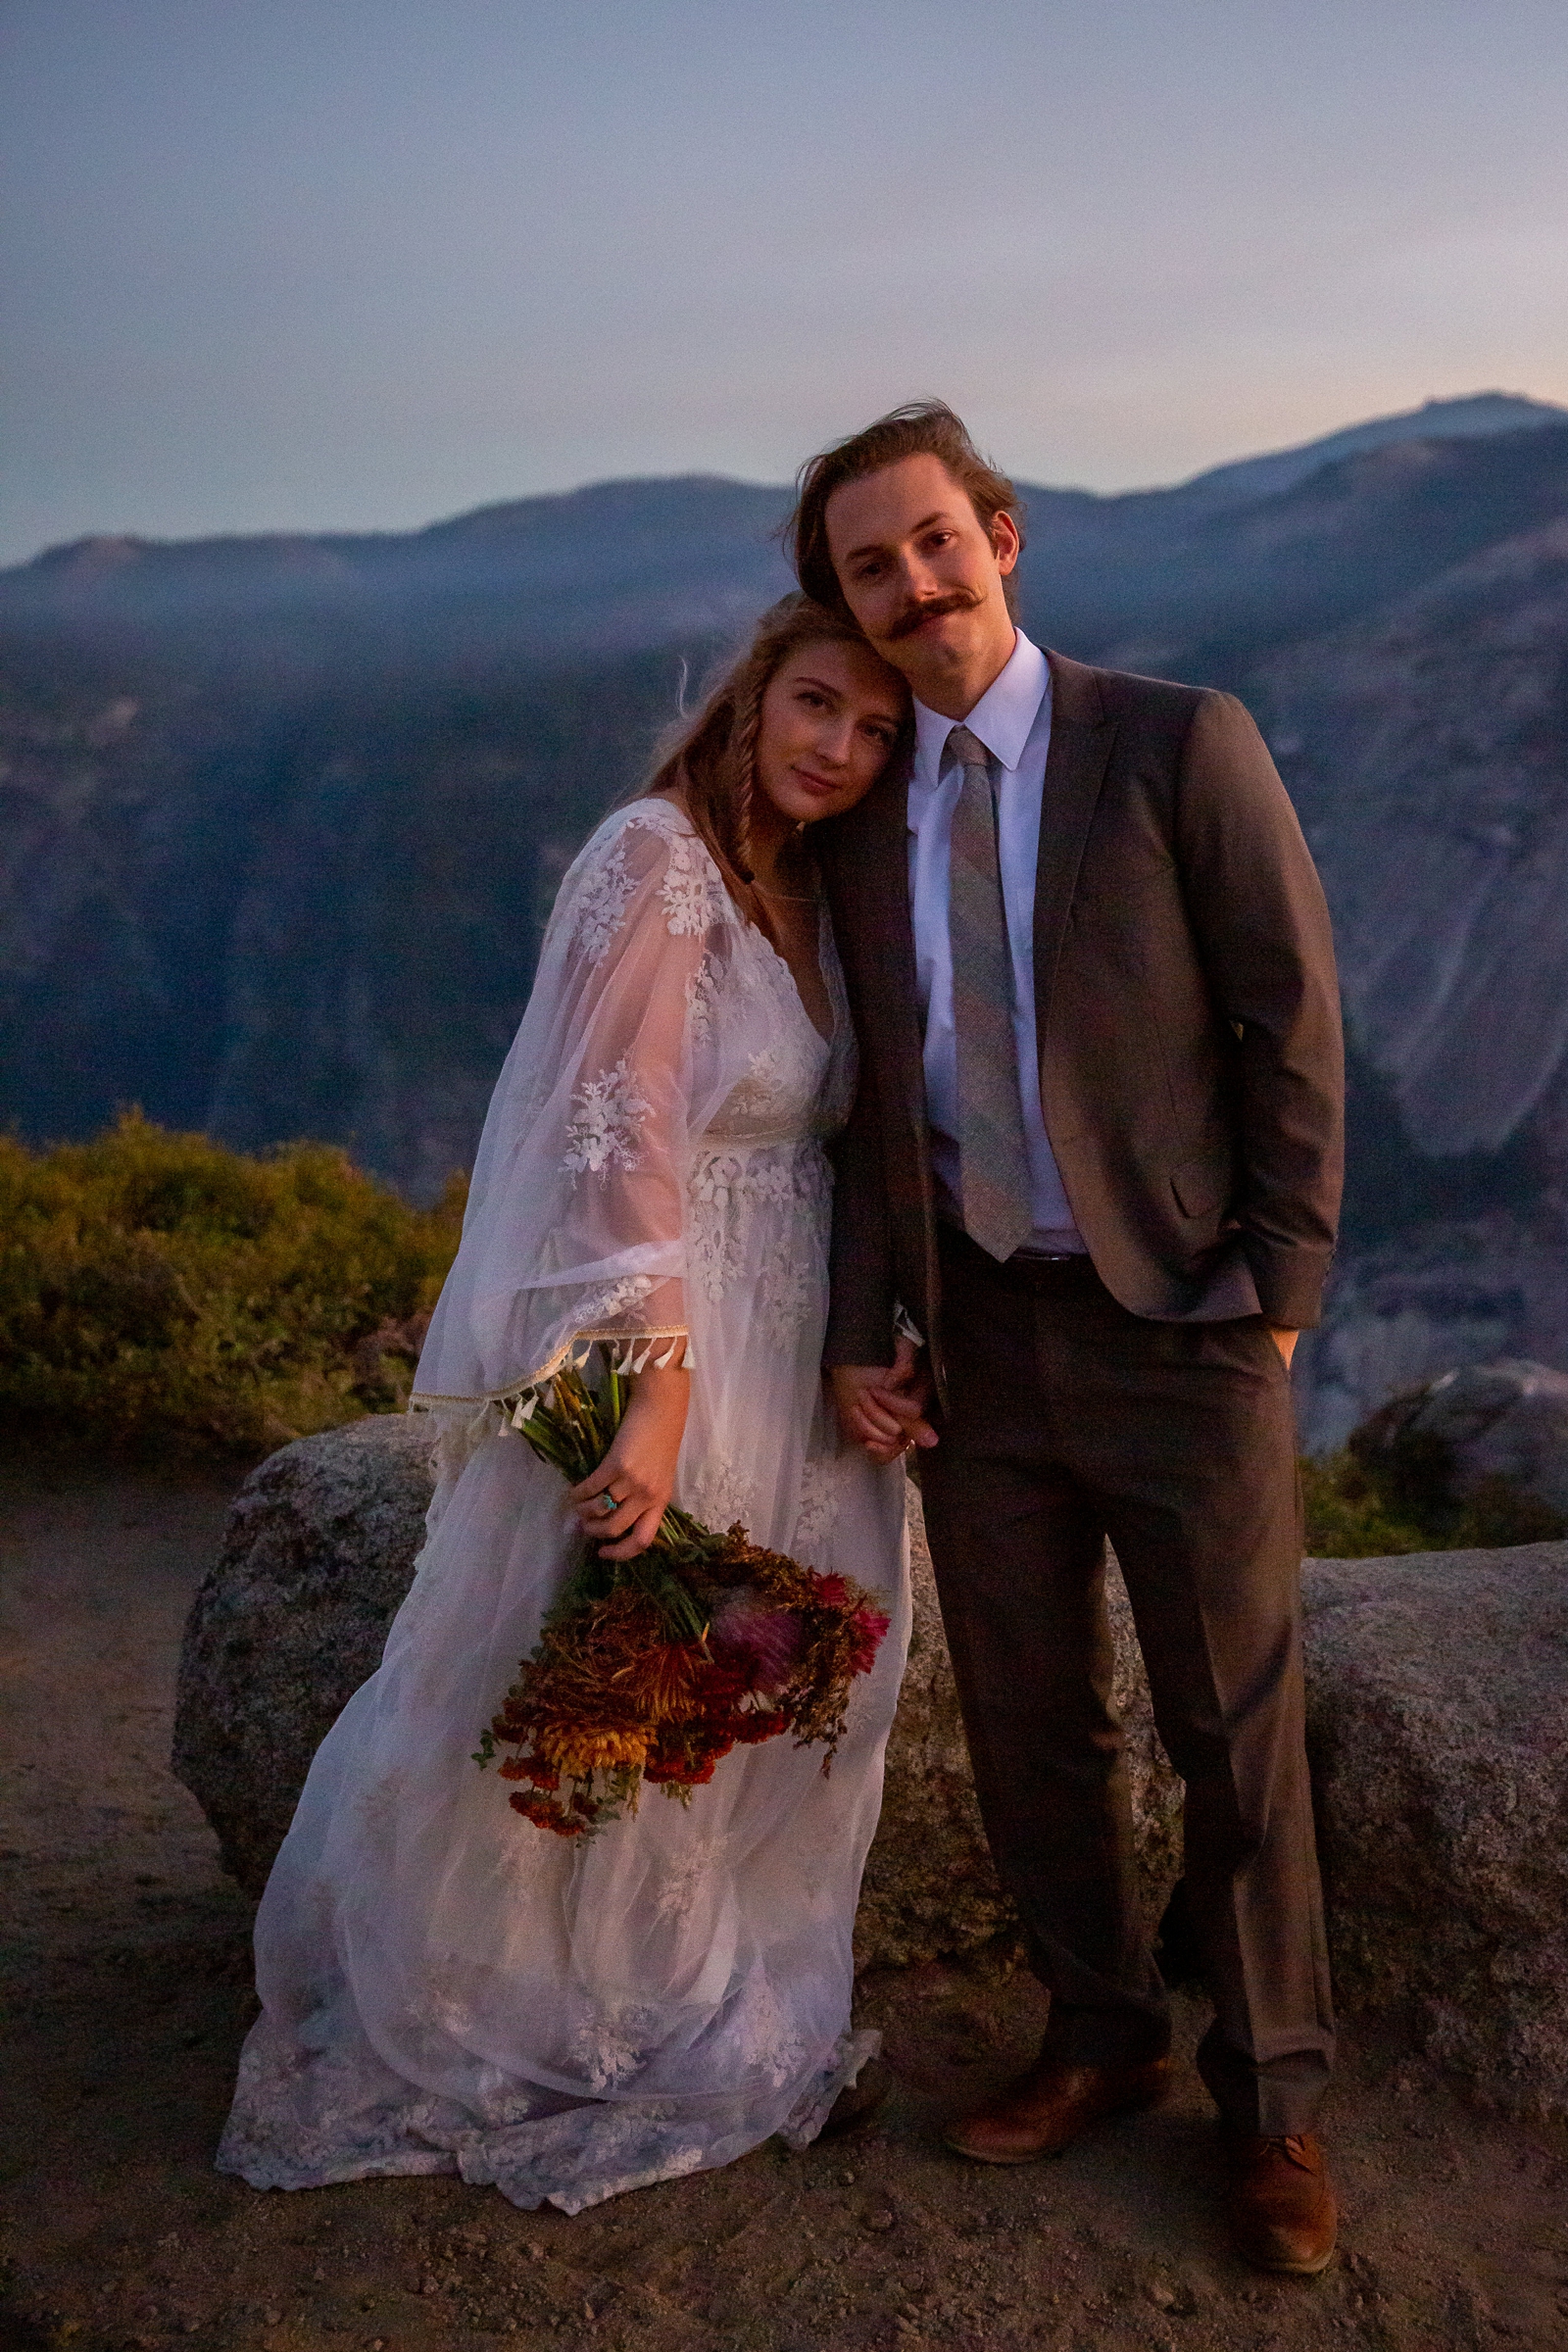 This couple eloped at Glacier Point in Yosemite NP.